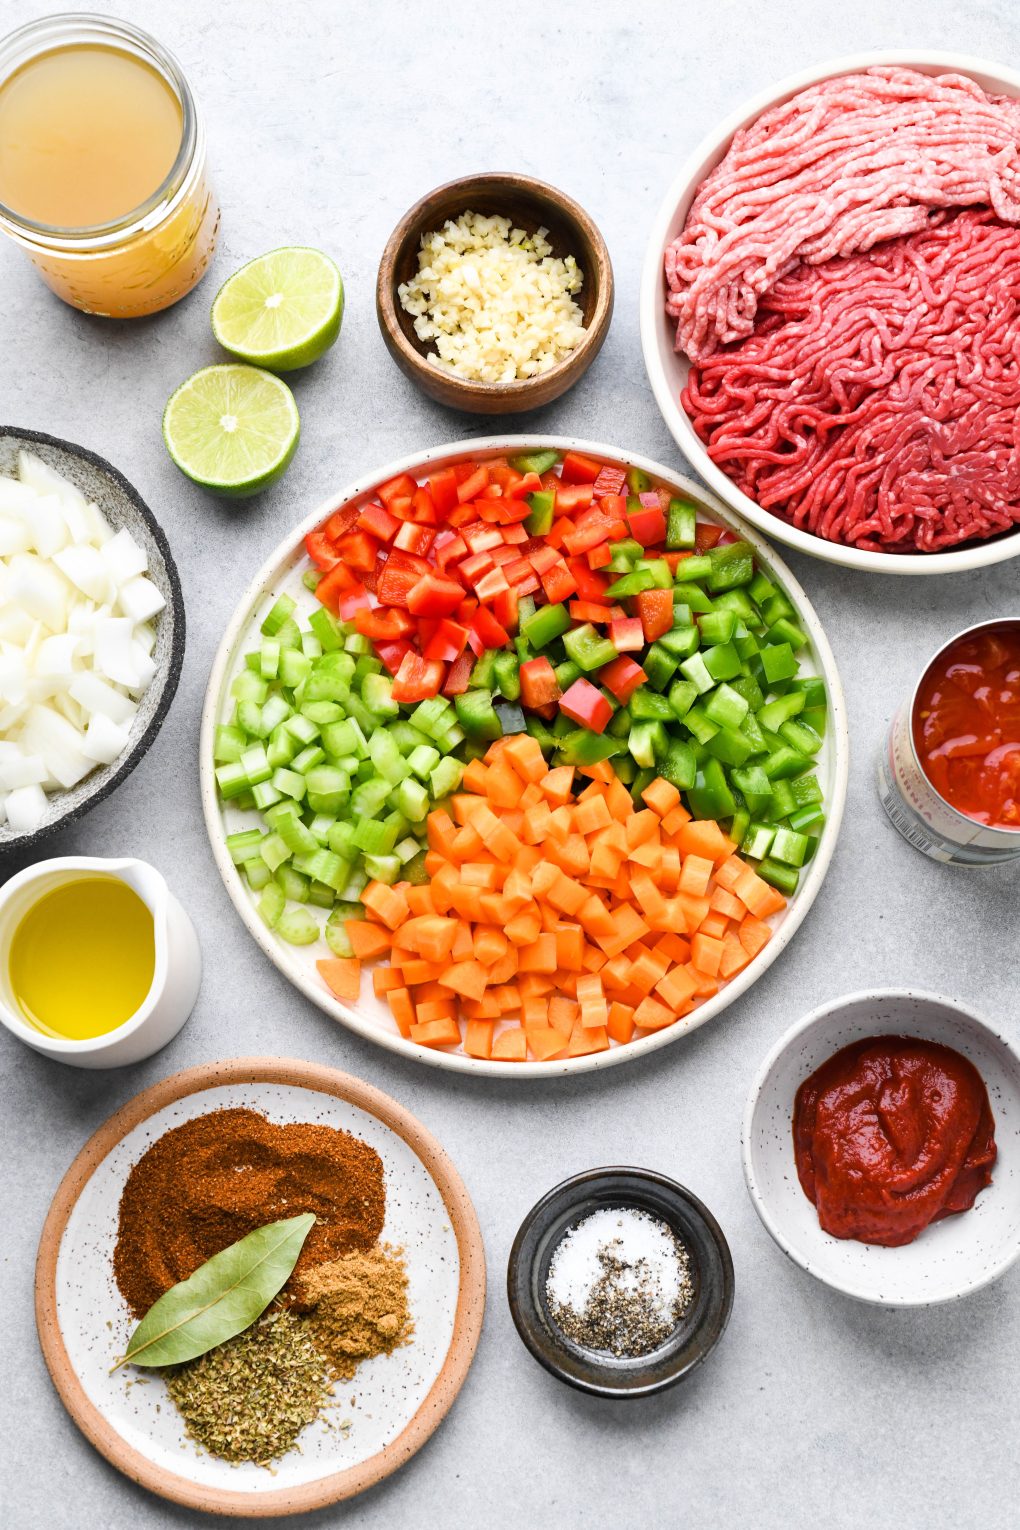 Ingredients for beanless Whole30 chili